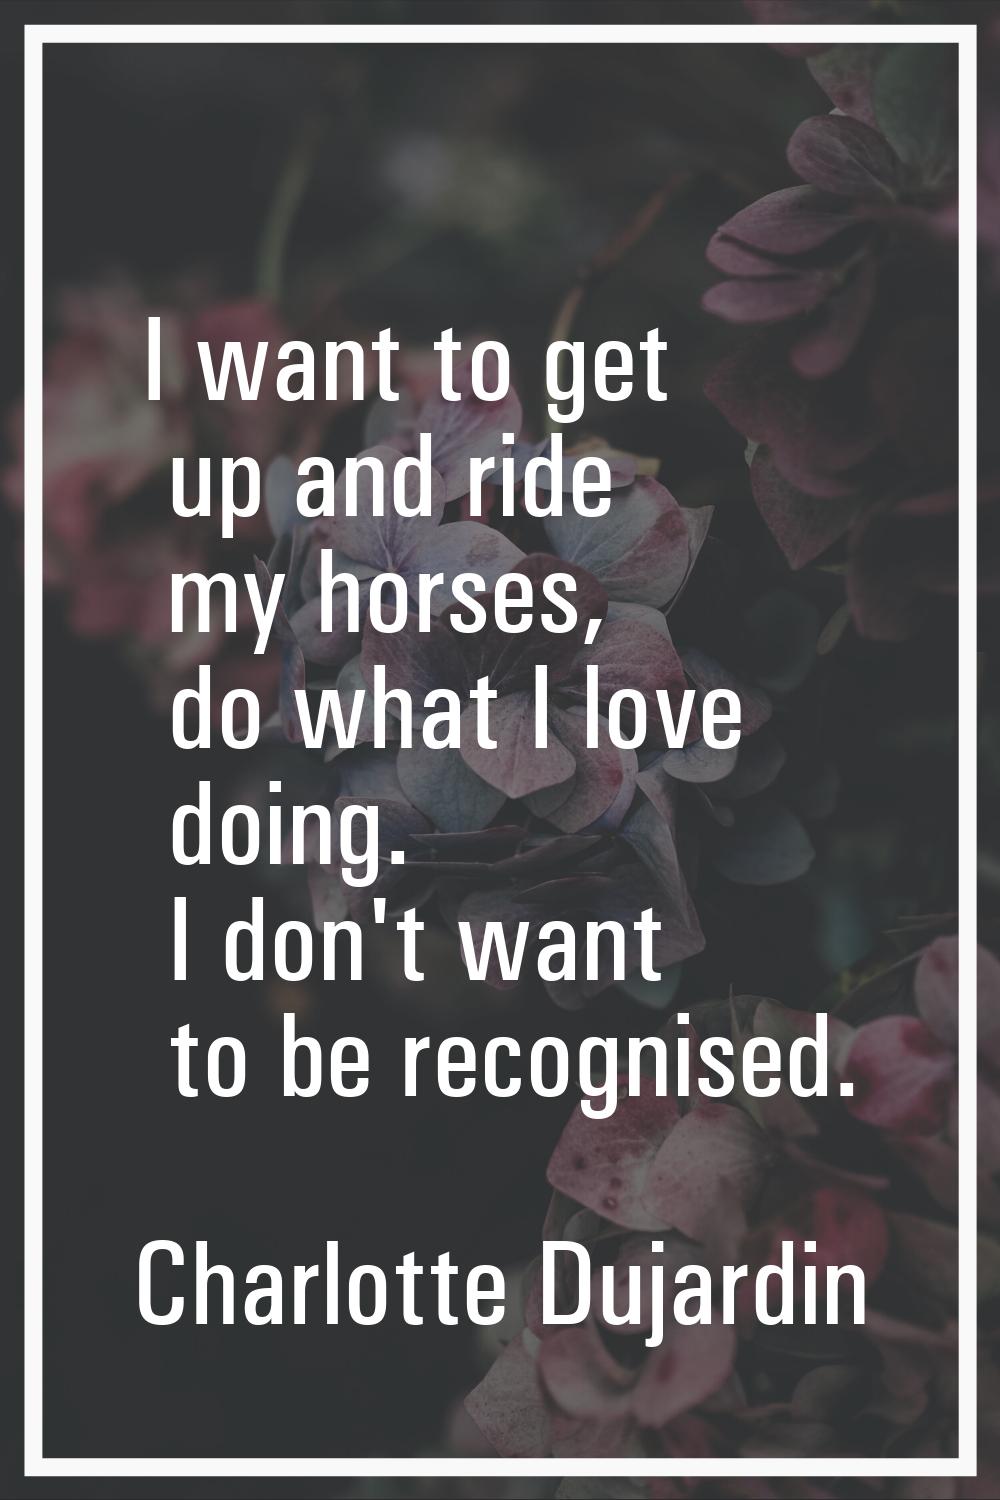 I want to get up and ride my horses, do what I love doing. I don't want to be recognised.